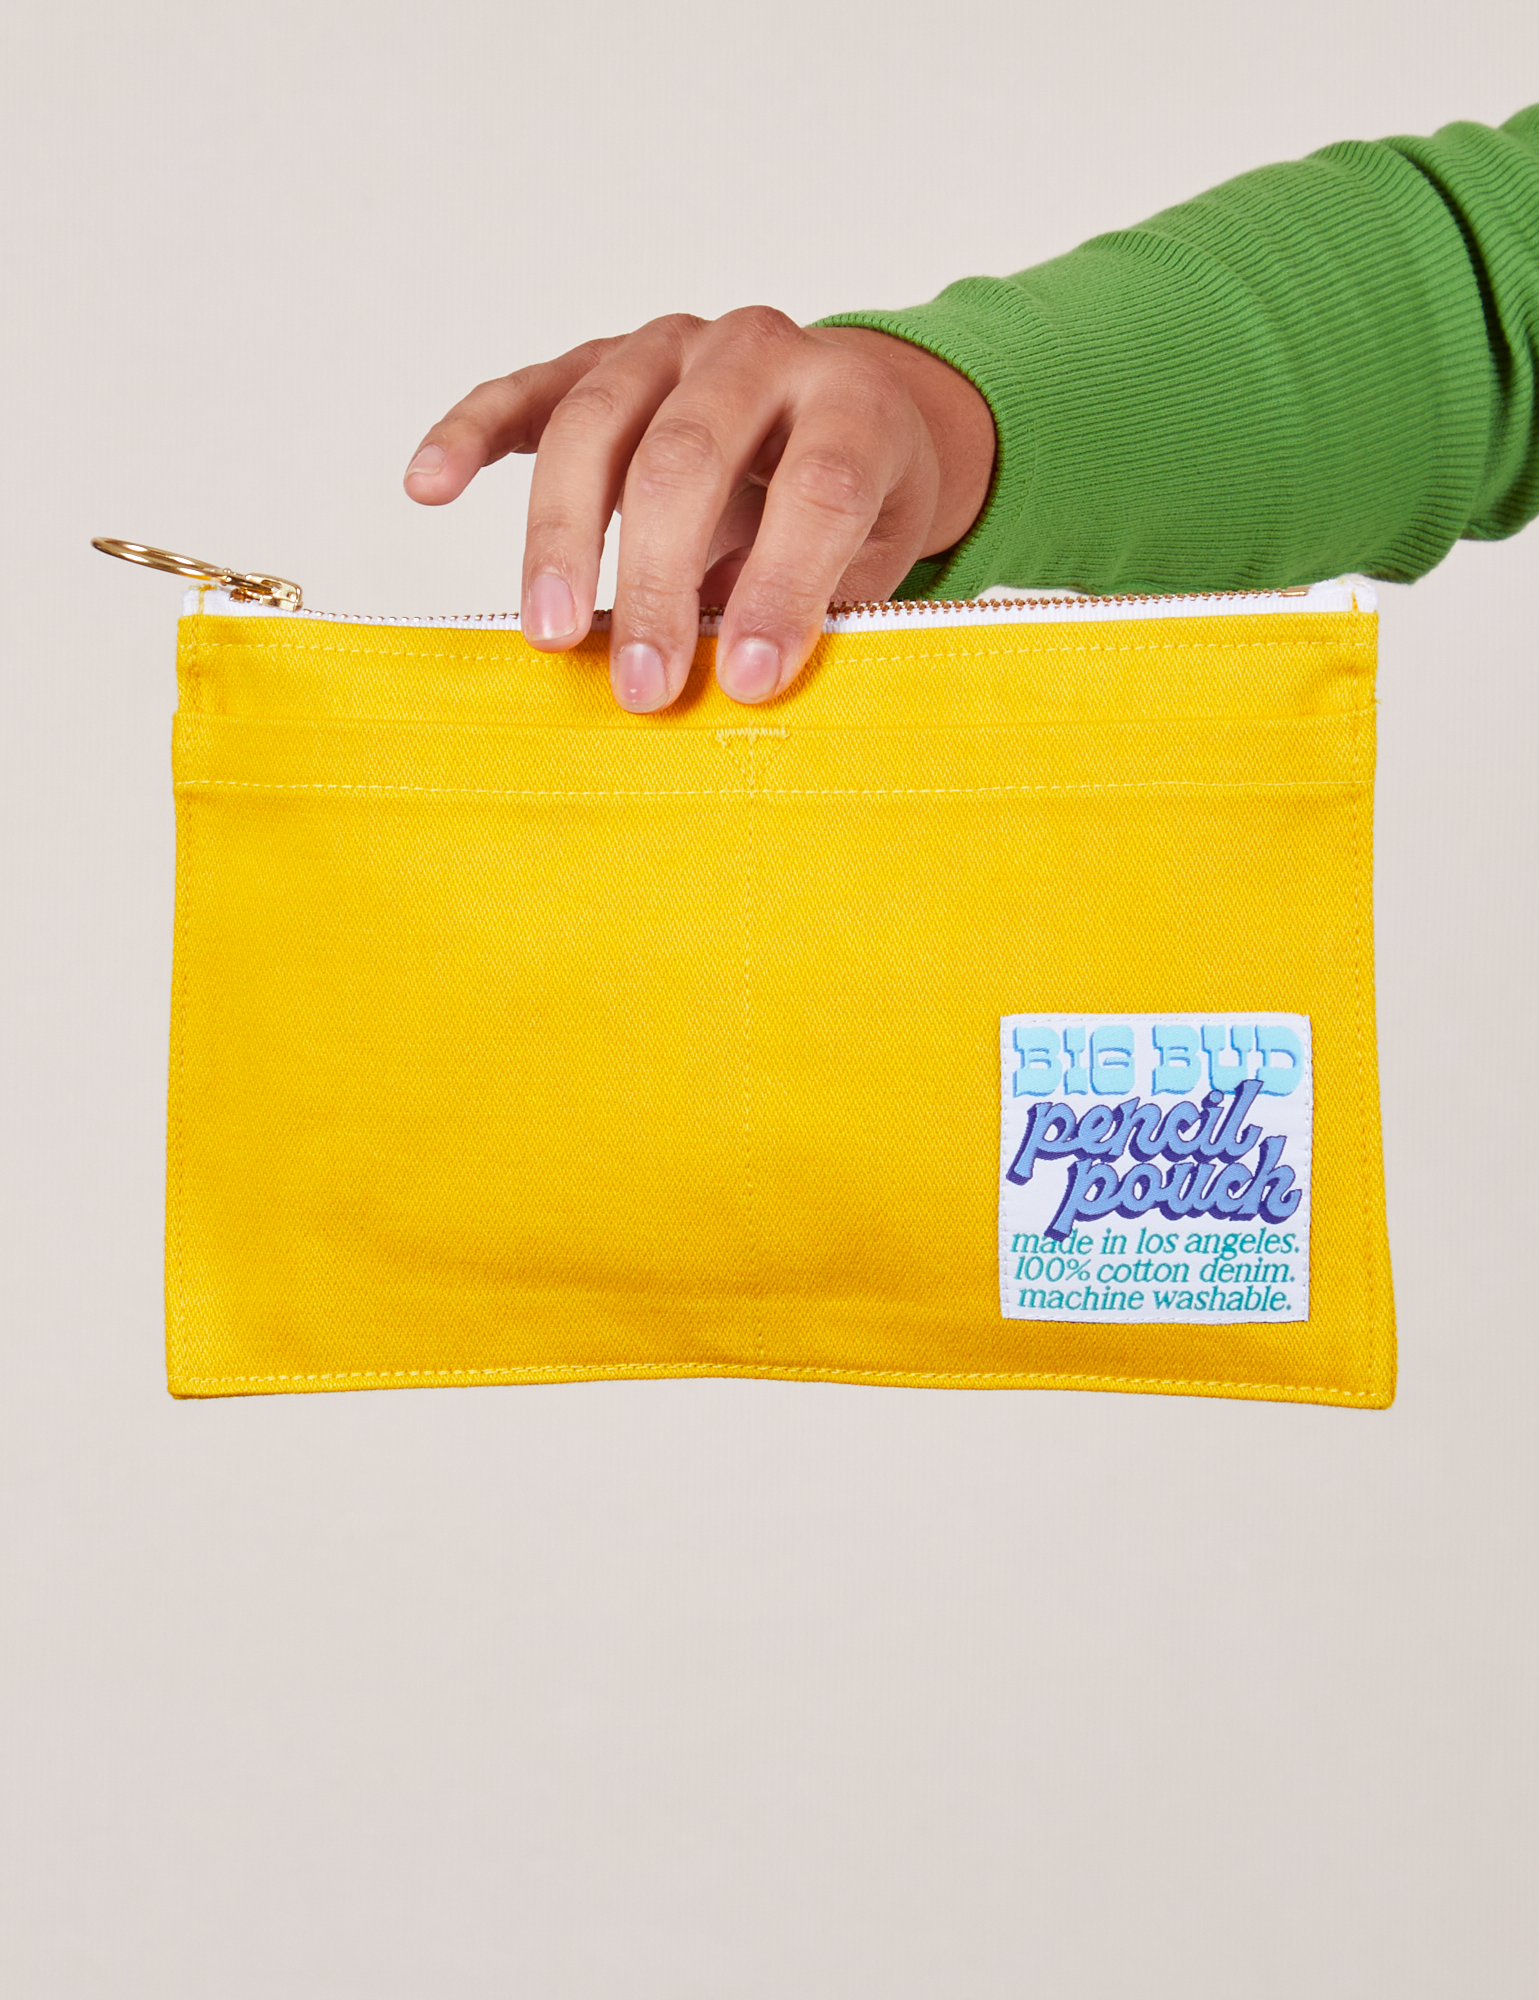 Pencil Pouch in Golden Yellow held by model